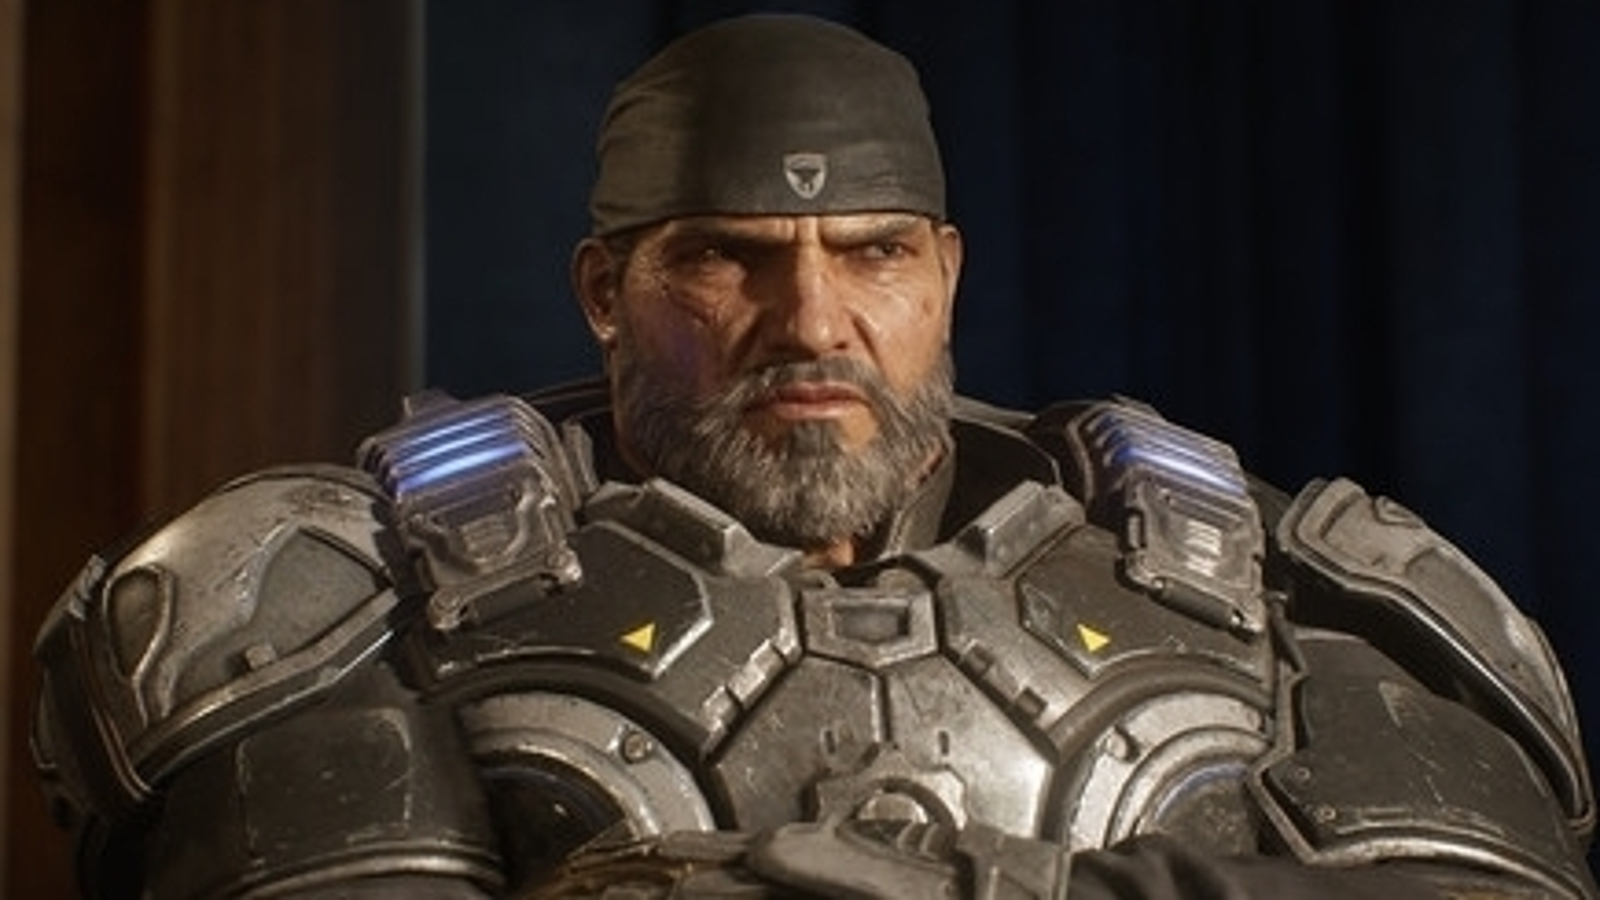 Gears 5 Campaign Won't Have 4 Player Co-op Due To Design and